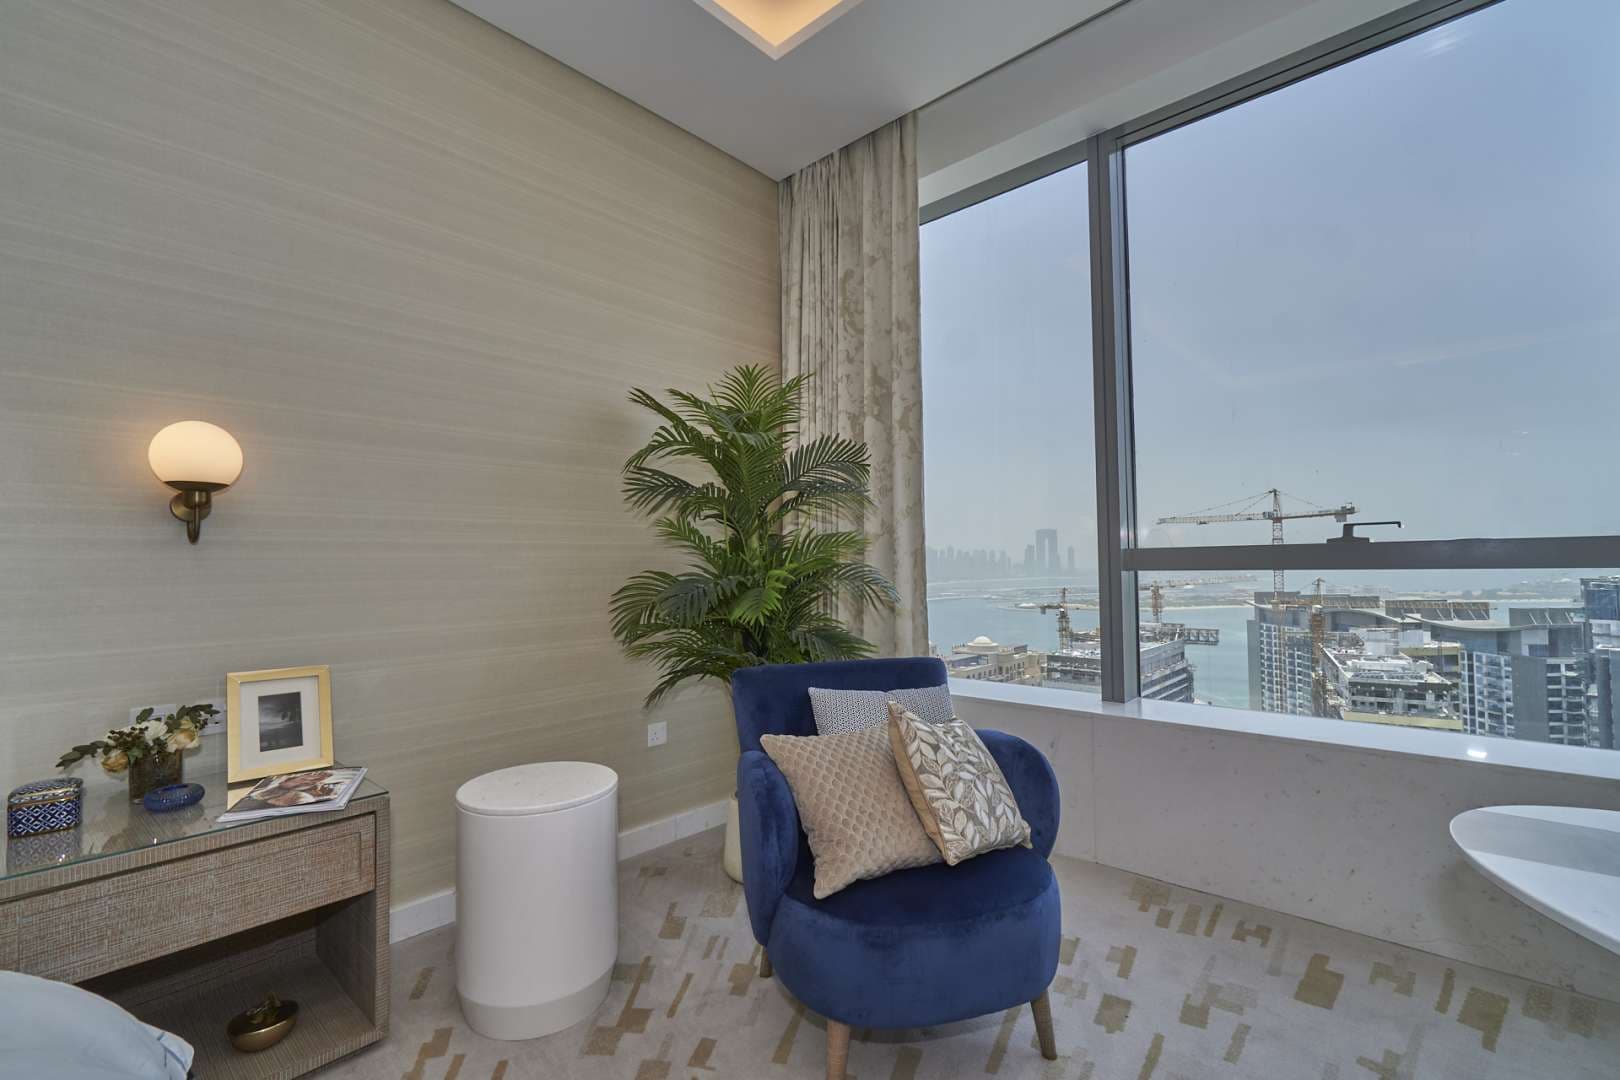 Studio Bedroom Apartment For Sale The Palm Tower Lp04013 32c6b0be46a9a40.jpg